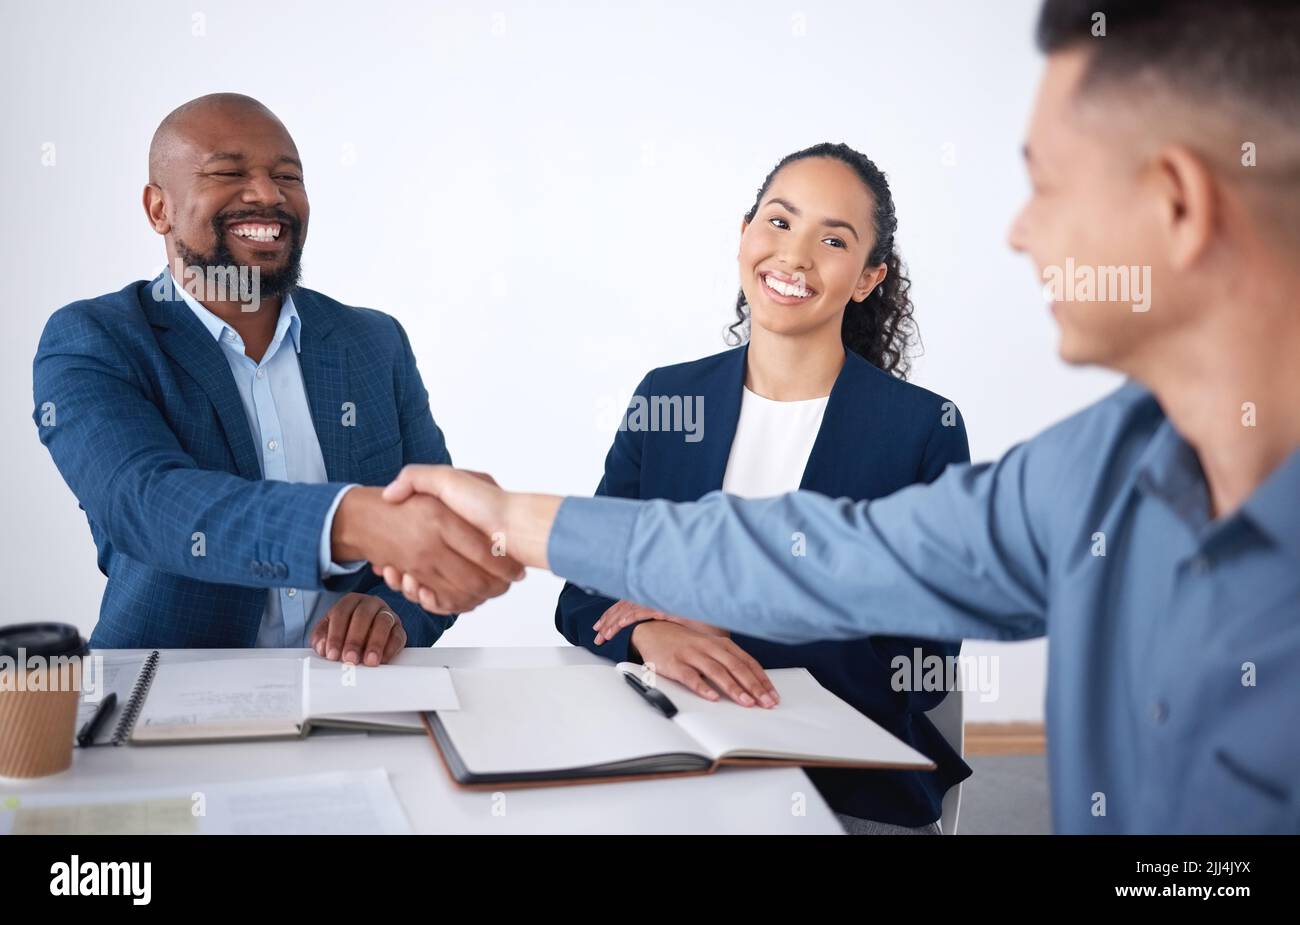 Team of smiling diverse business people shaking hands in office after meeting in boardroom. Group of happy professionals and colleagues using Stock Photo